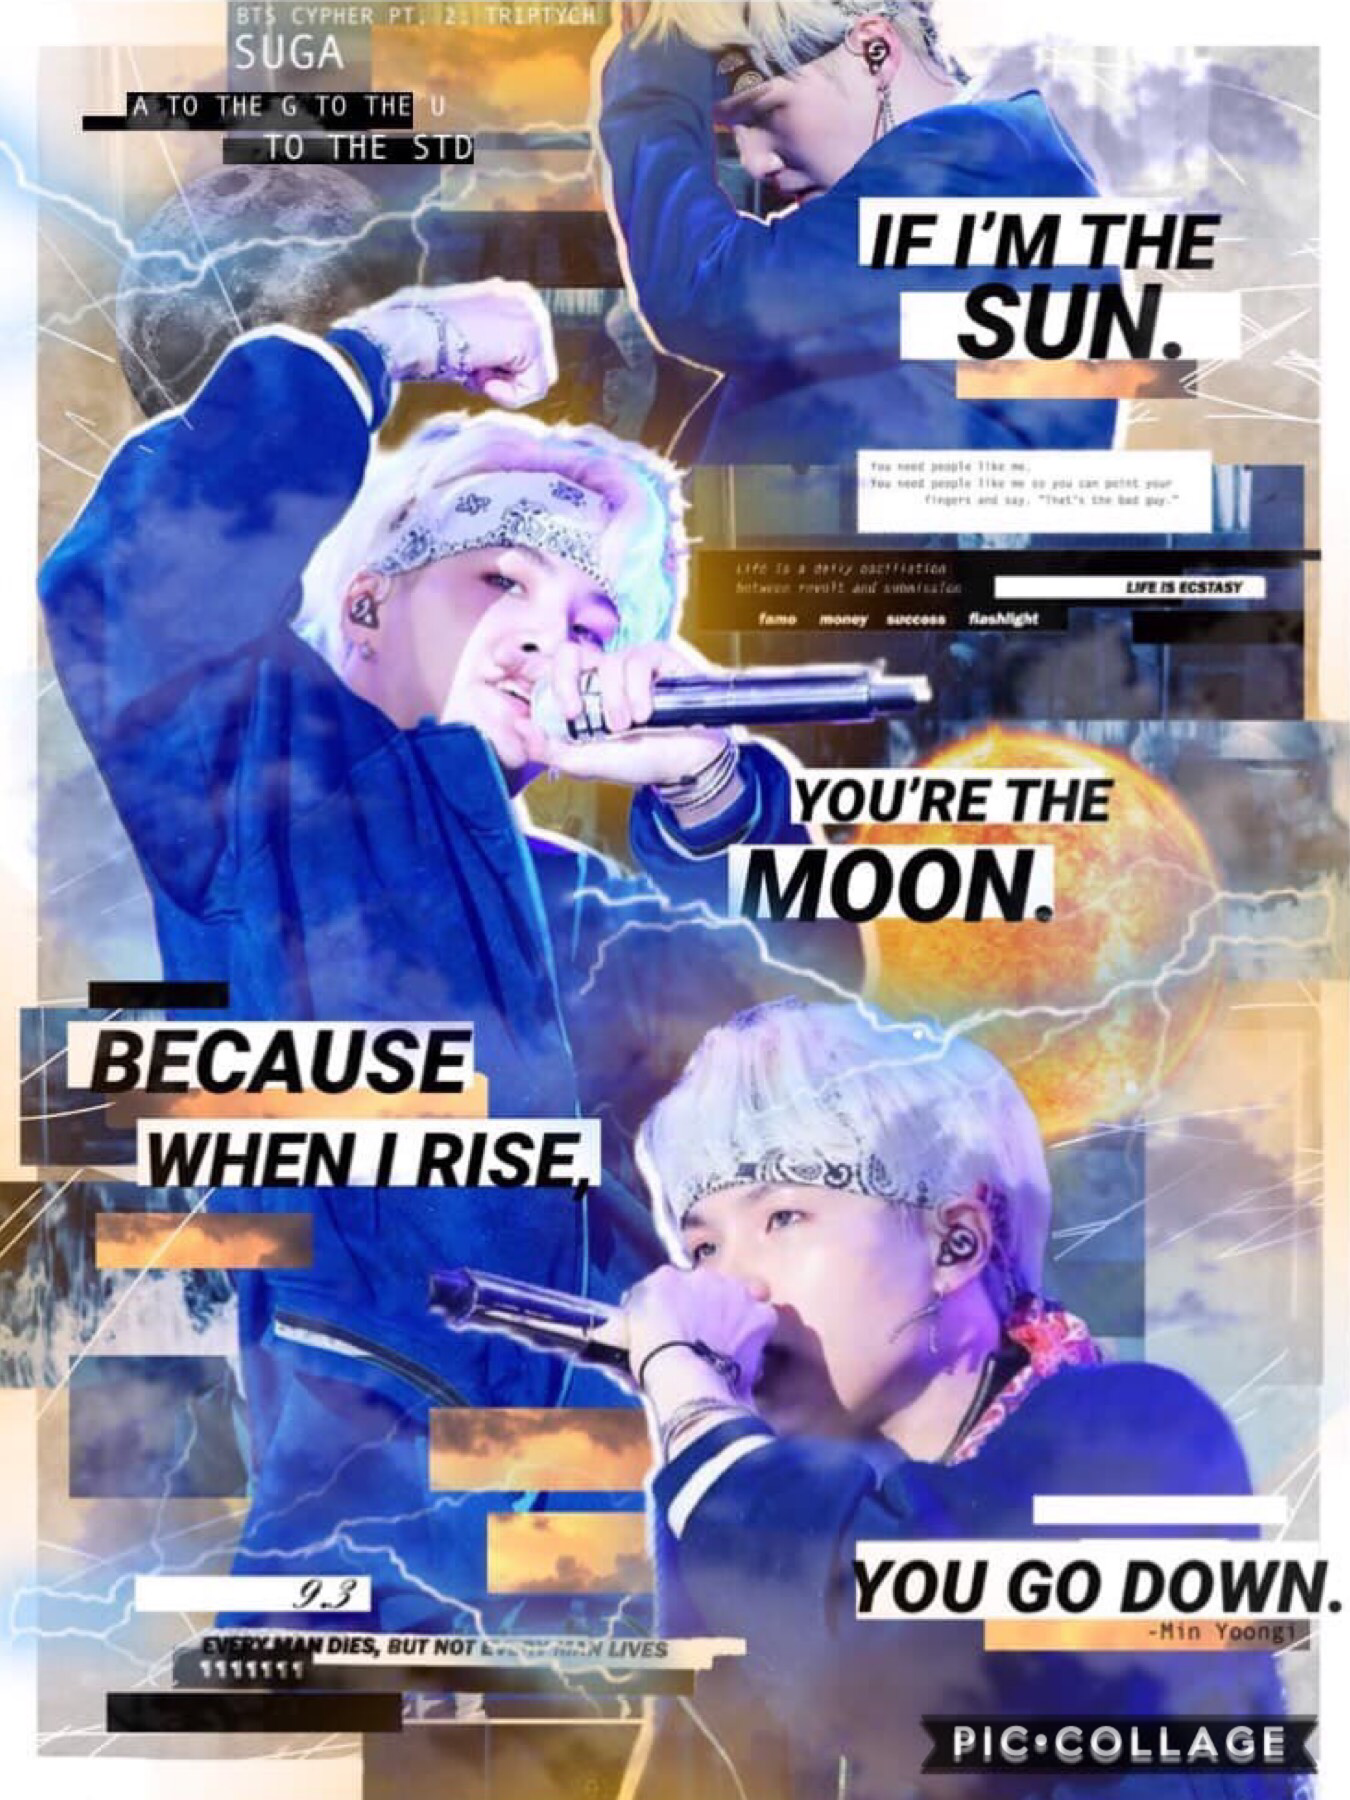 🎂[3.9.93] HAPPY BDAY YOONGIIIIIII!! With a fierce stance as a rapper, but a heart softer than a kitten, you have one of the most enchanting auras on stage that I can’t even begin to describe. Remember, we love you💫